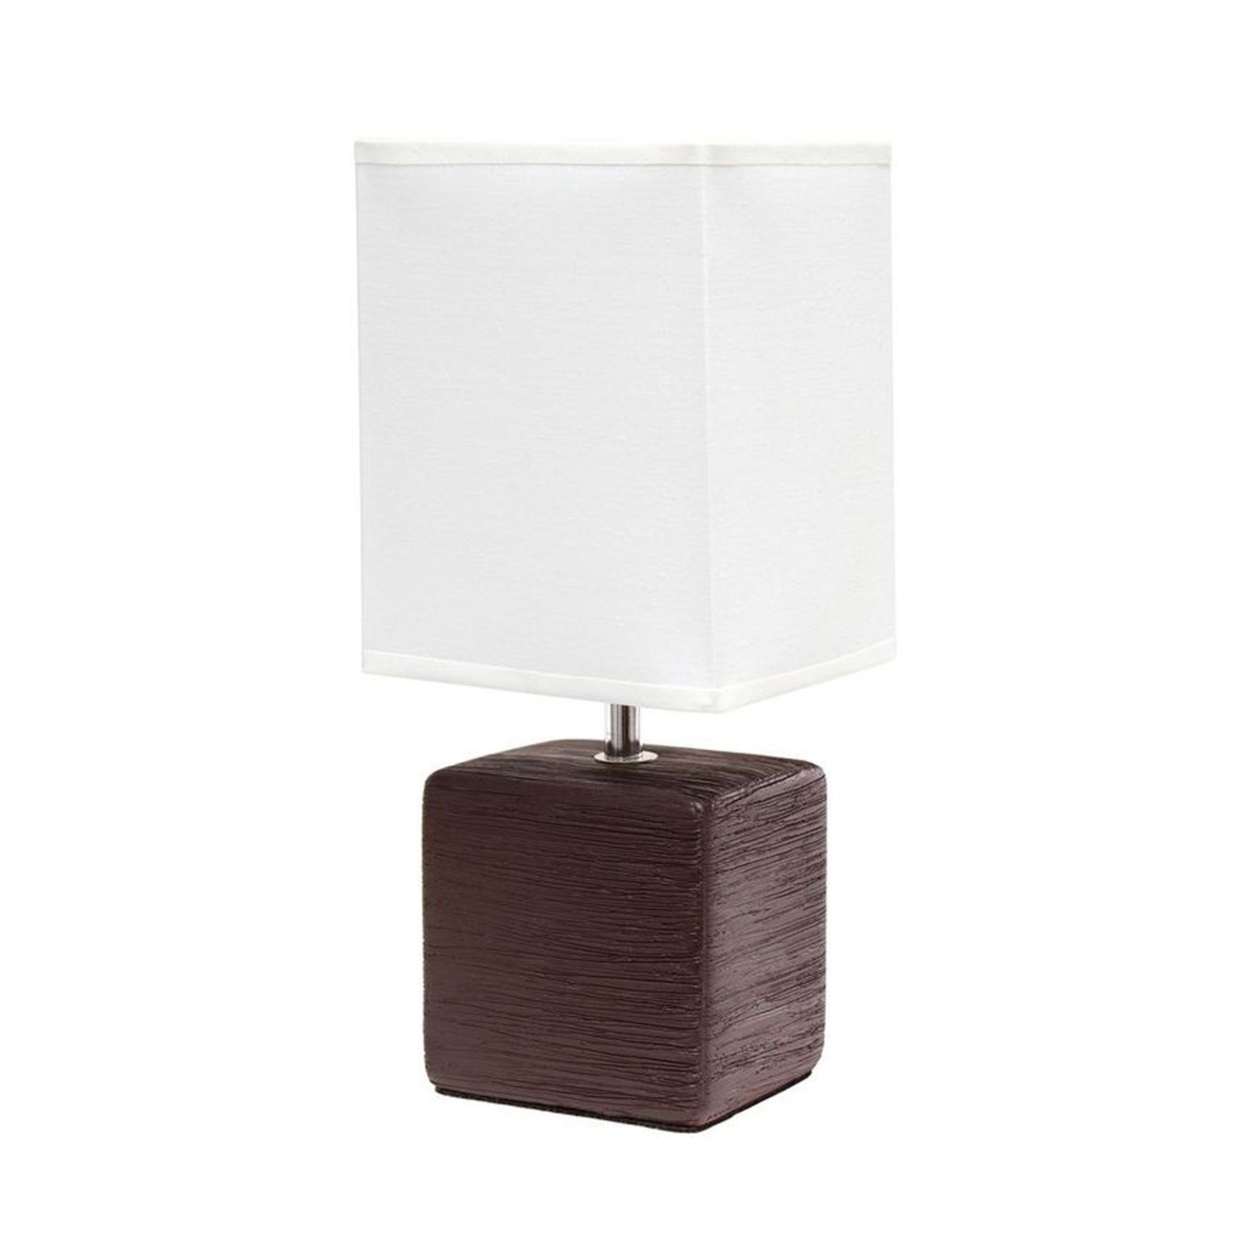 Simple Designs Petite Faux Stone Table Lamp with Fabric Shade, Brown with White Shade